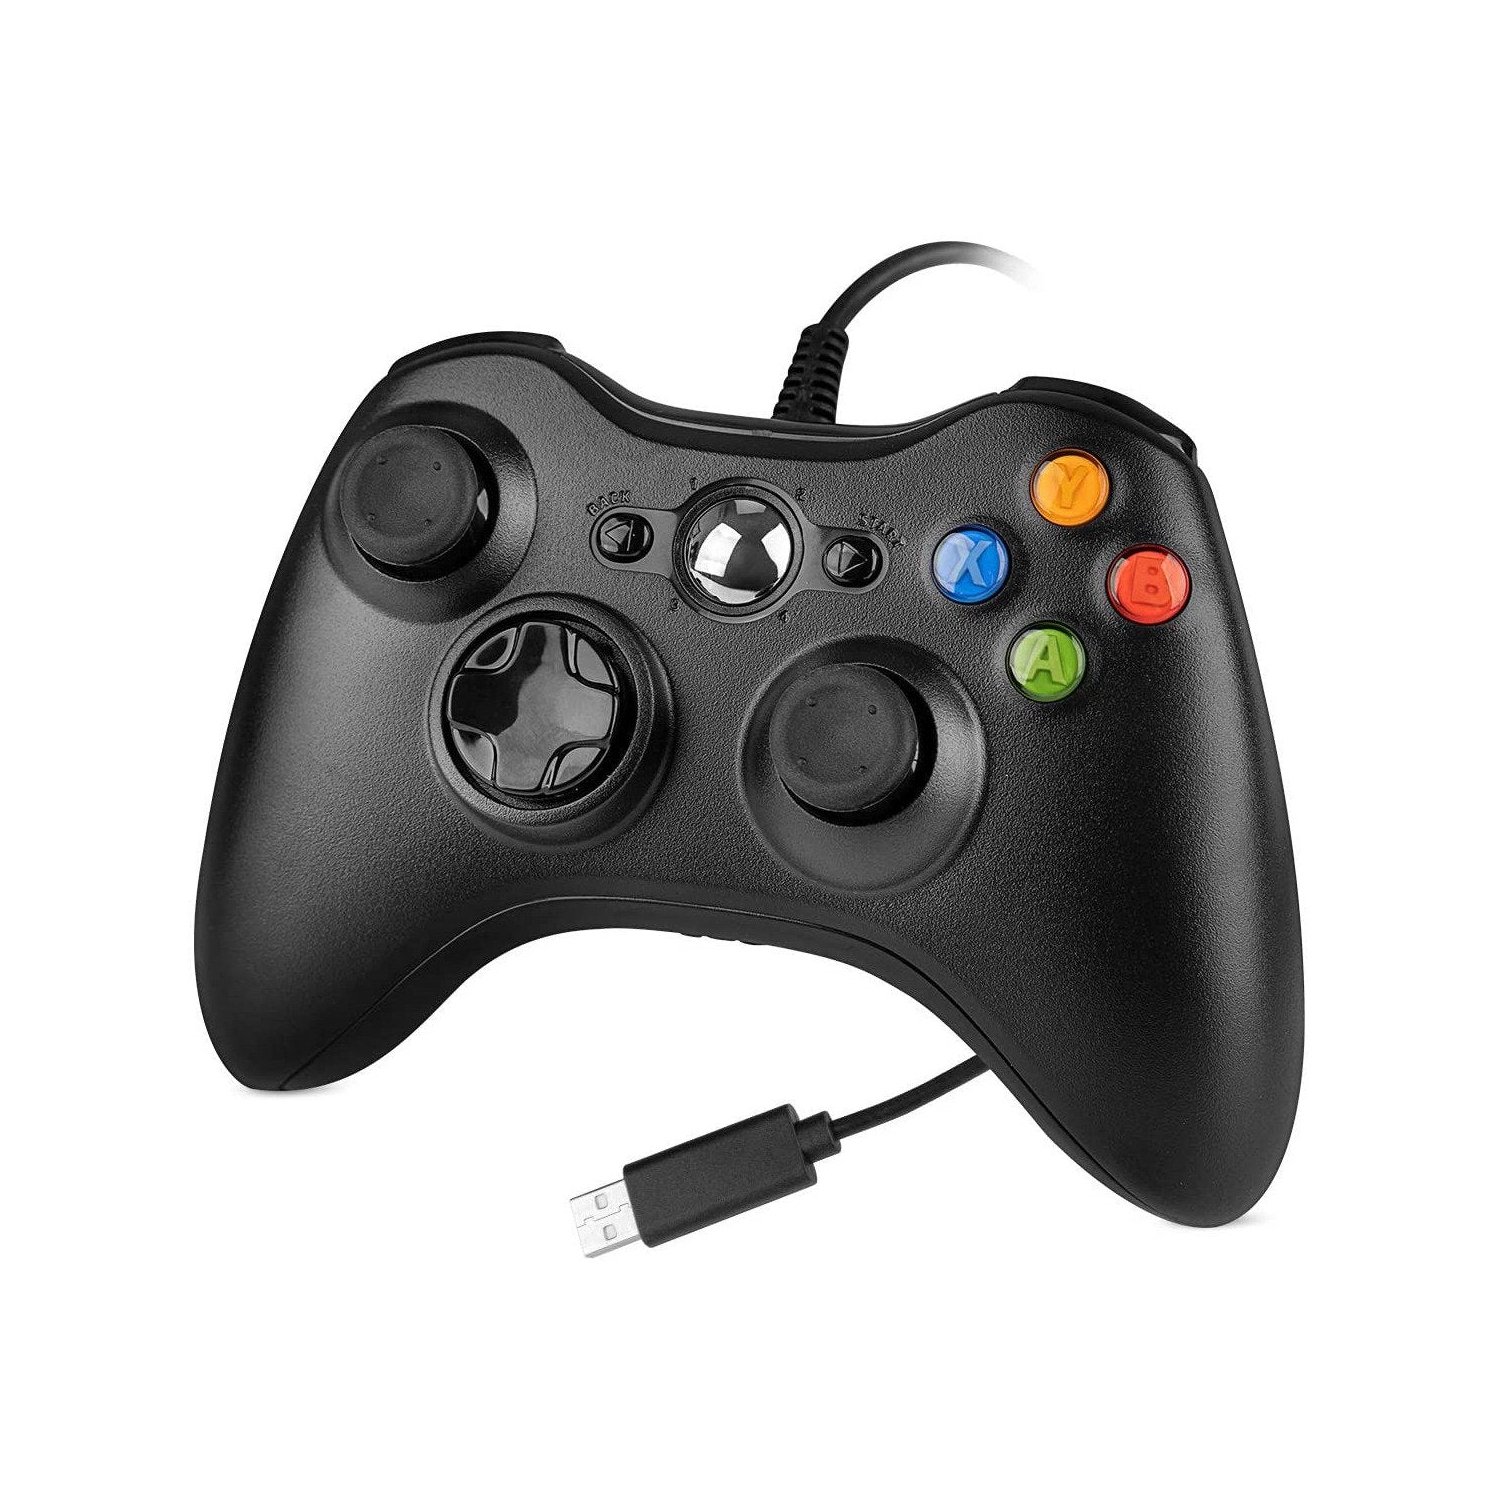 Wired PC USB Joypad Game Controller for Microsoft Windows Xbox 360 Non Official -Black by Mario Retro